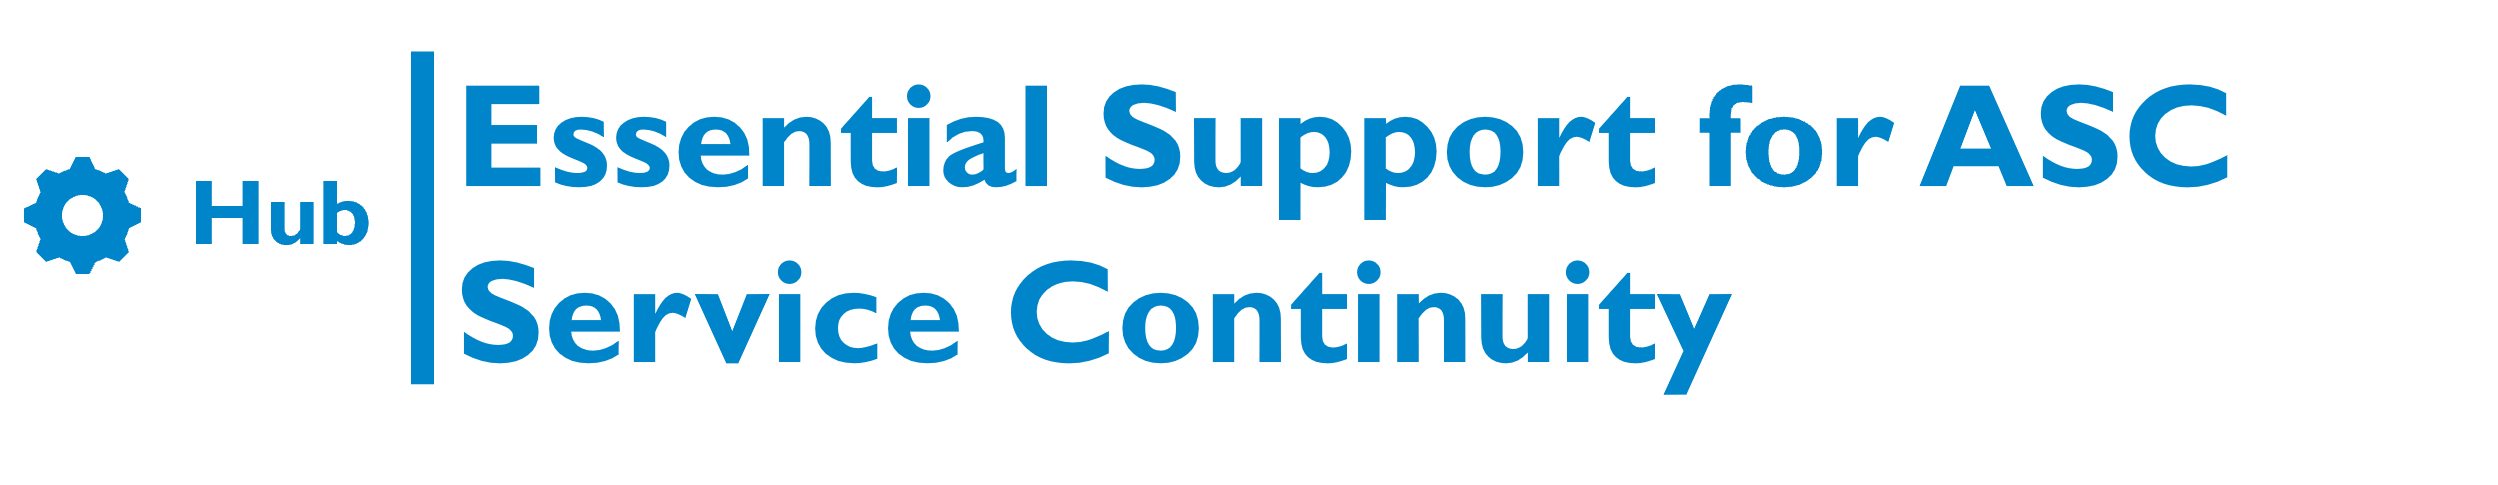 Essential Support Hub